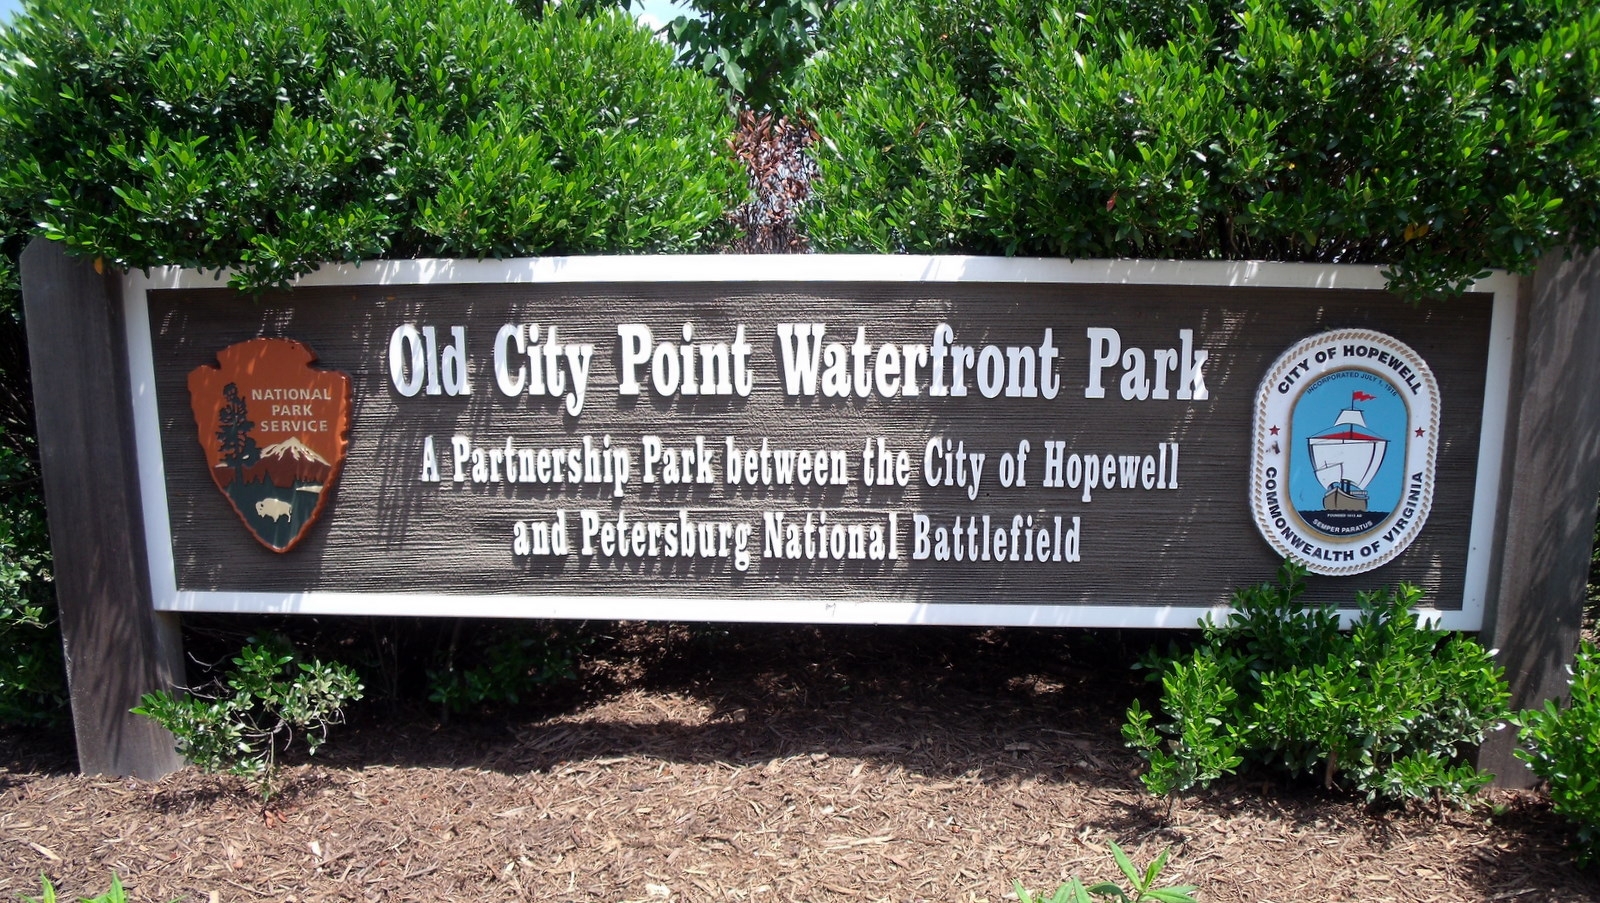 Old City Point Waterfront Park